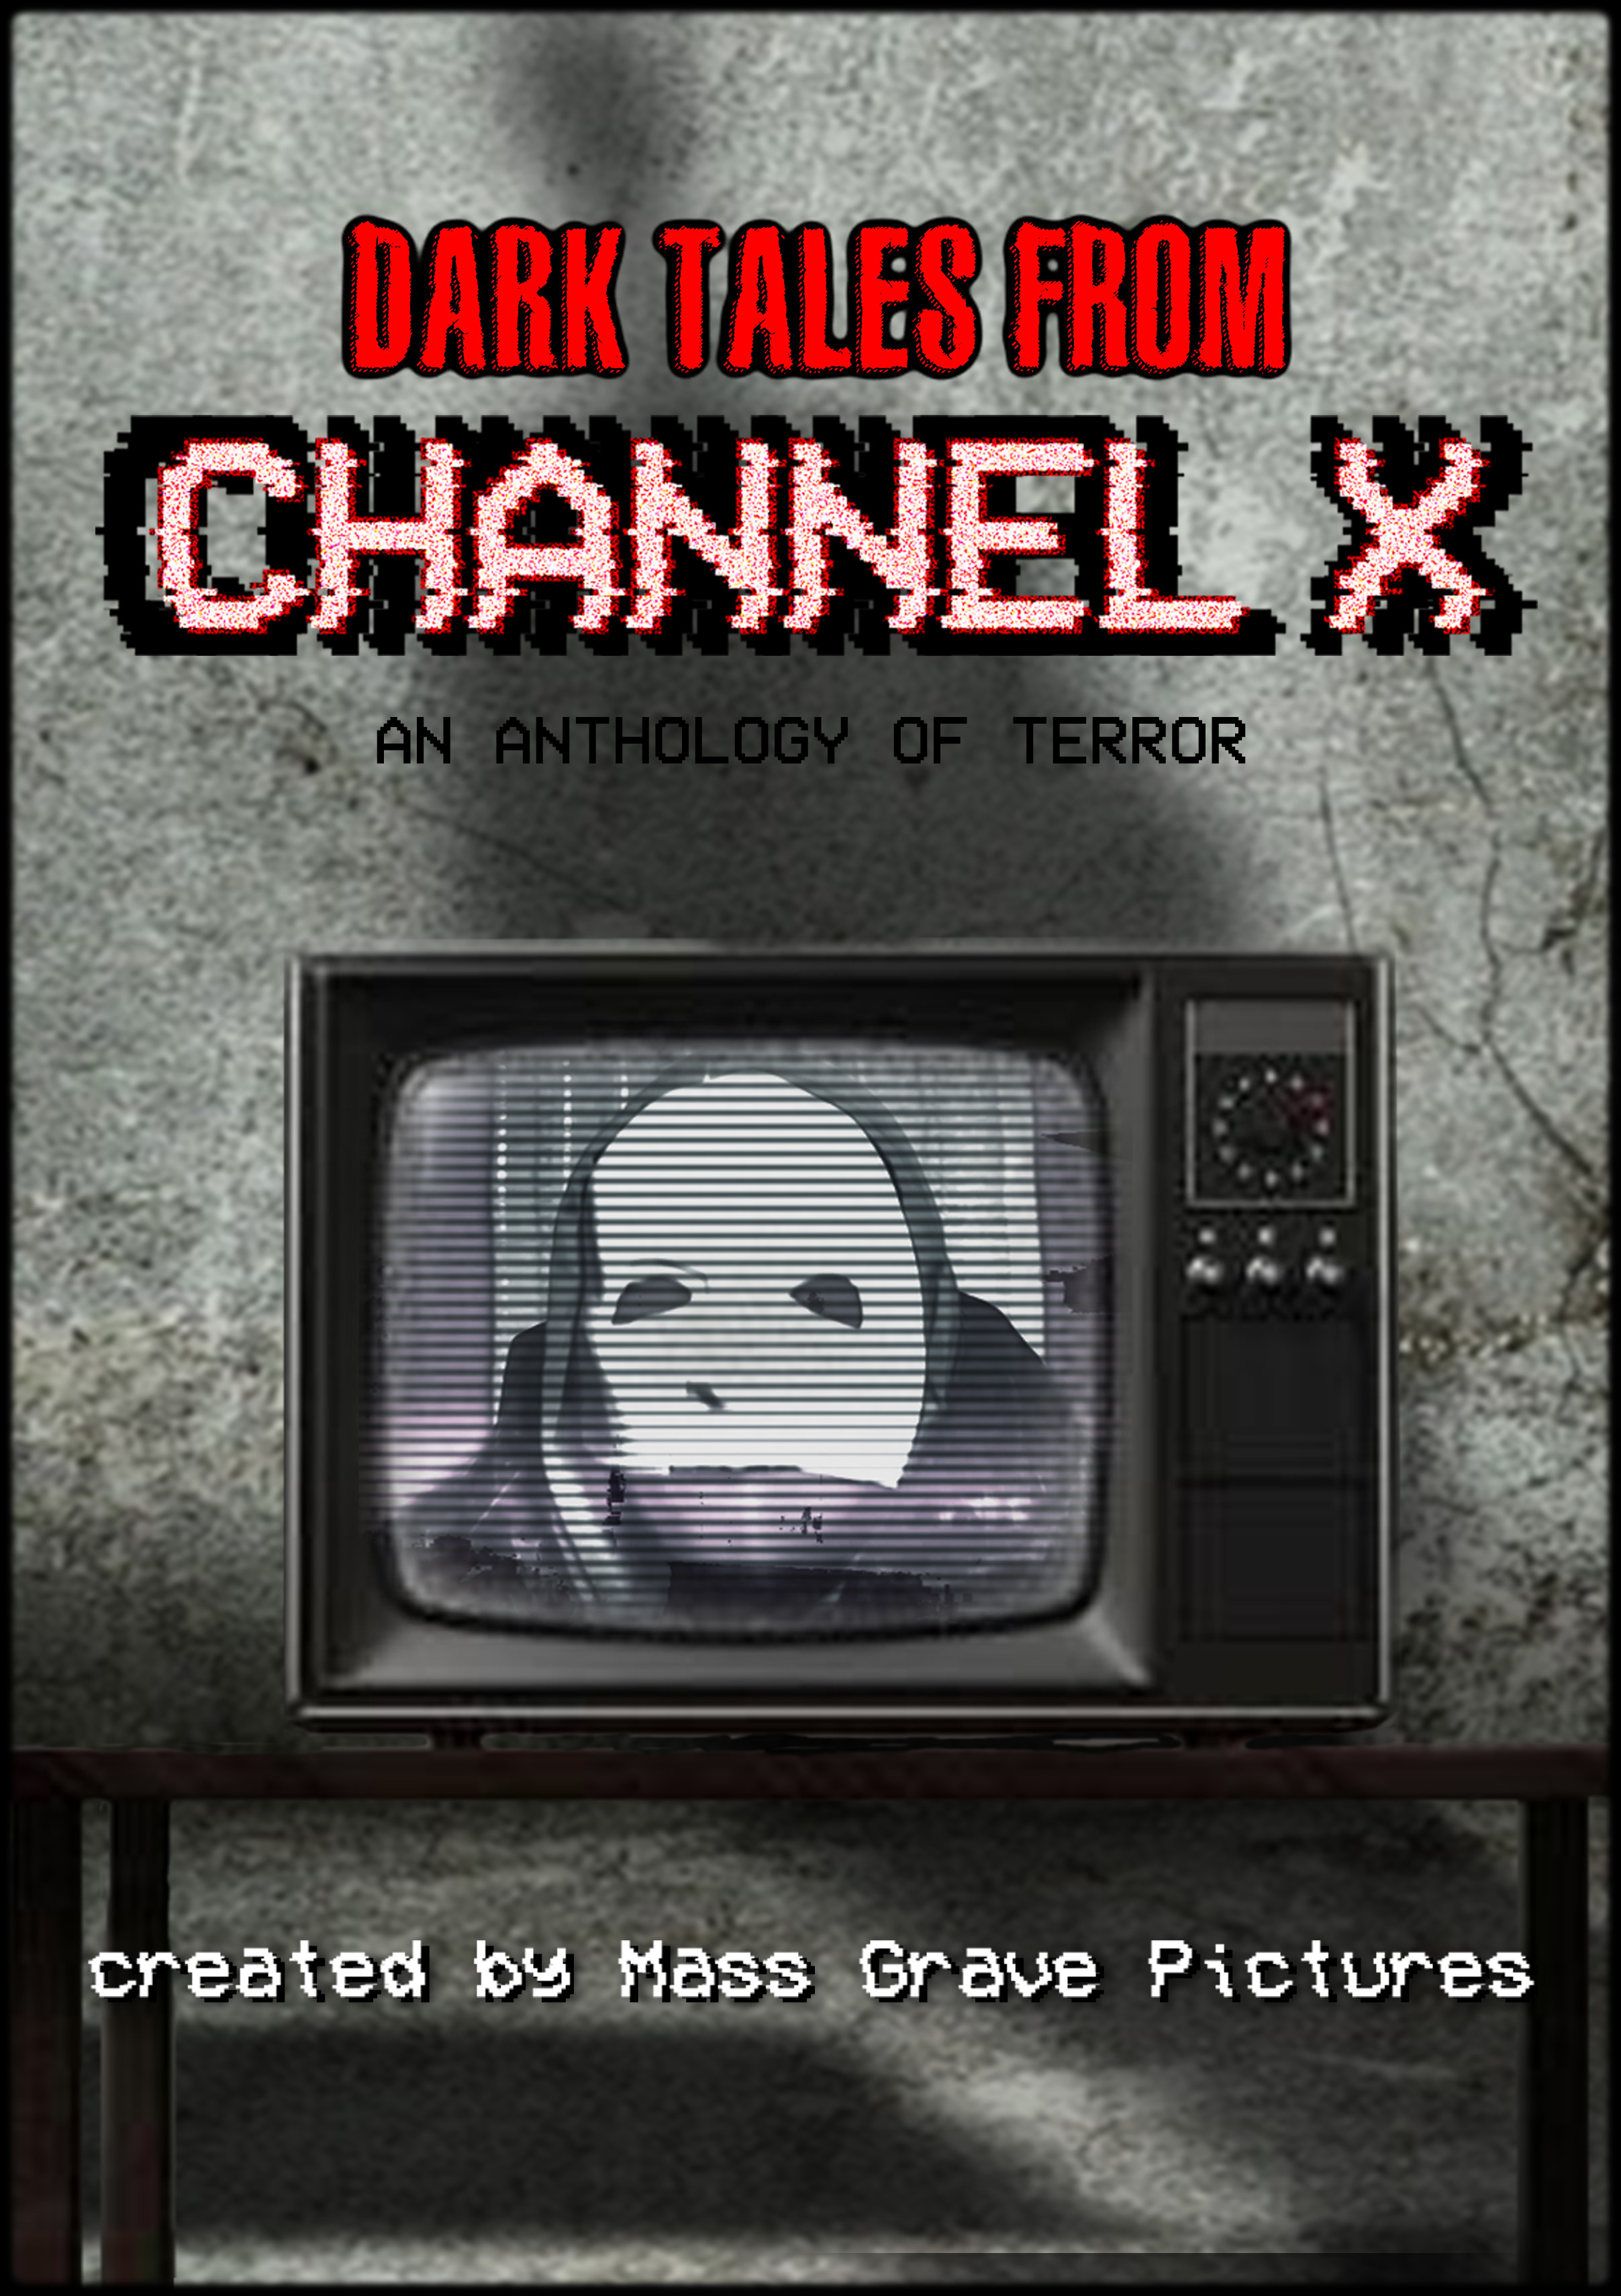 Dark Tales from Channel X